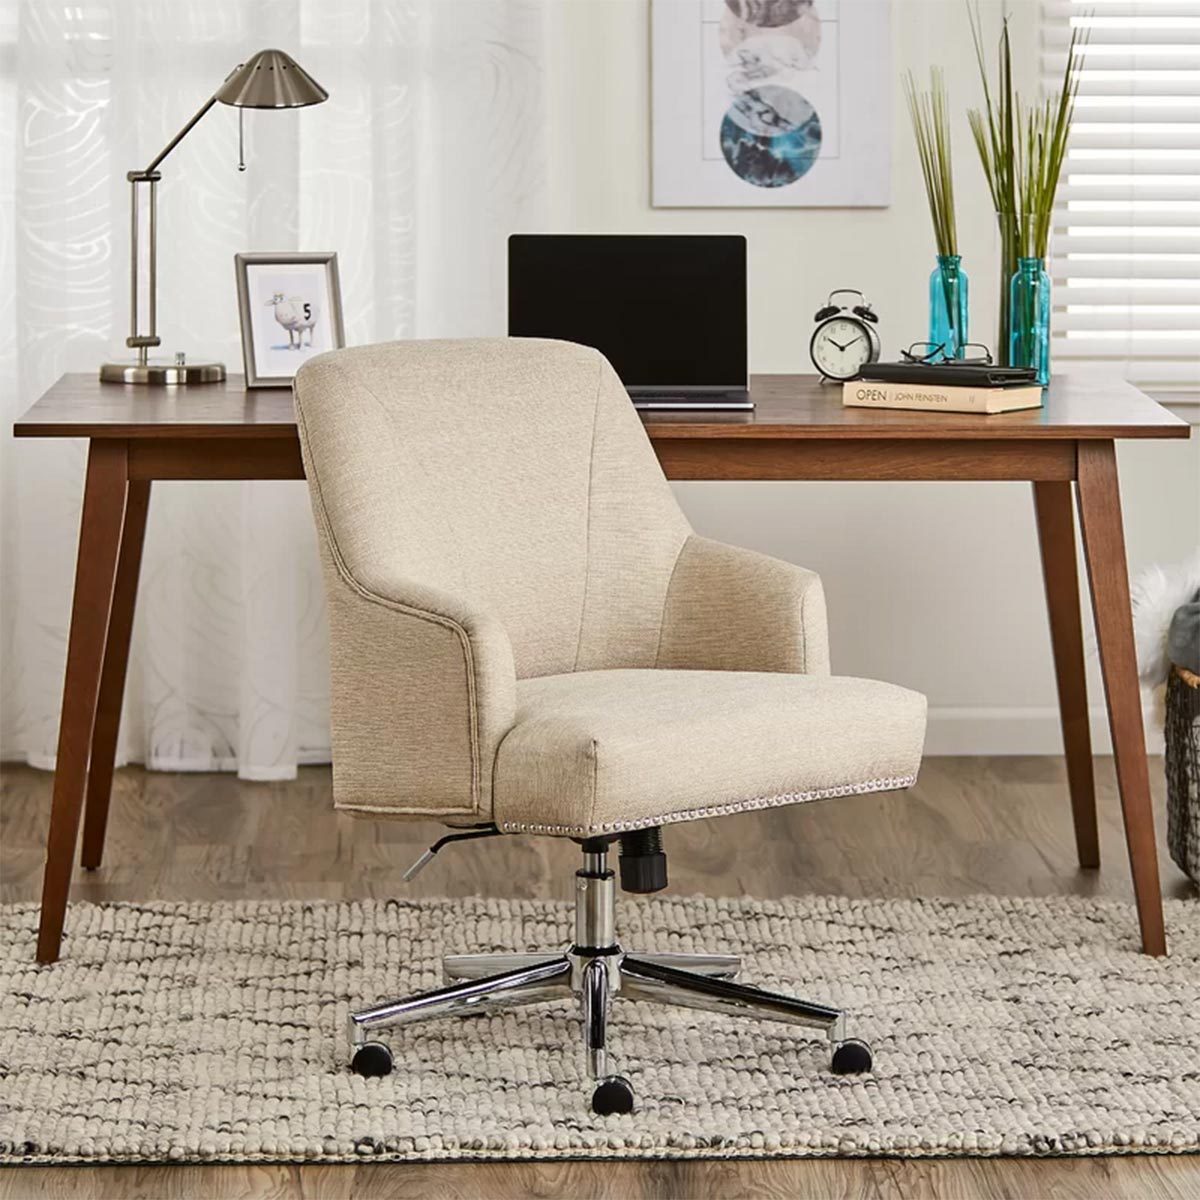 Best Home Office Chair | Family Handyman